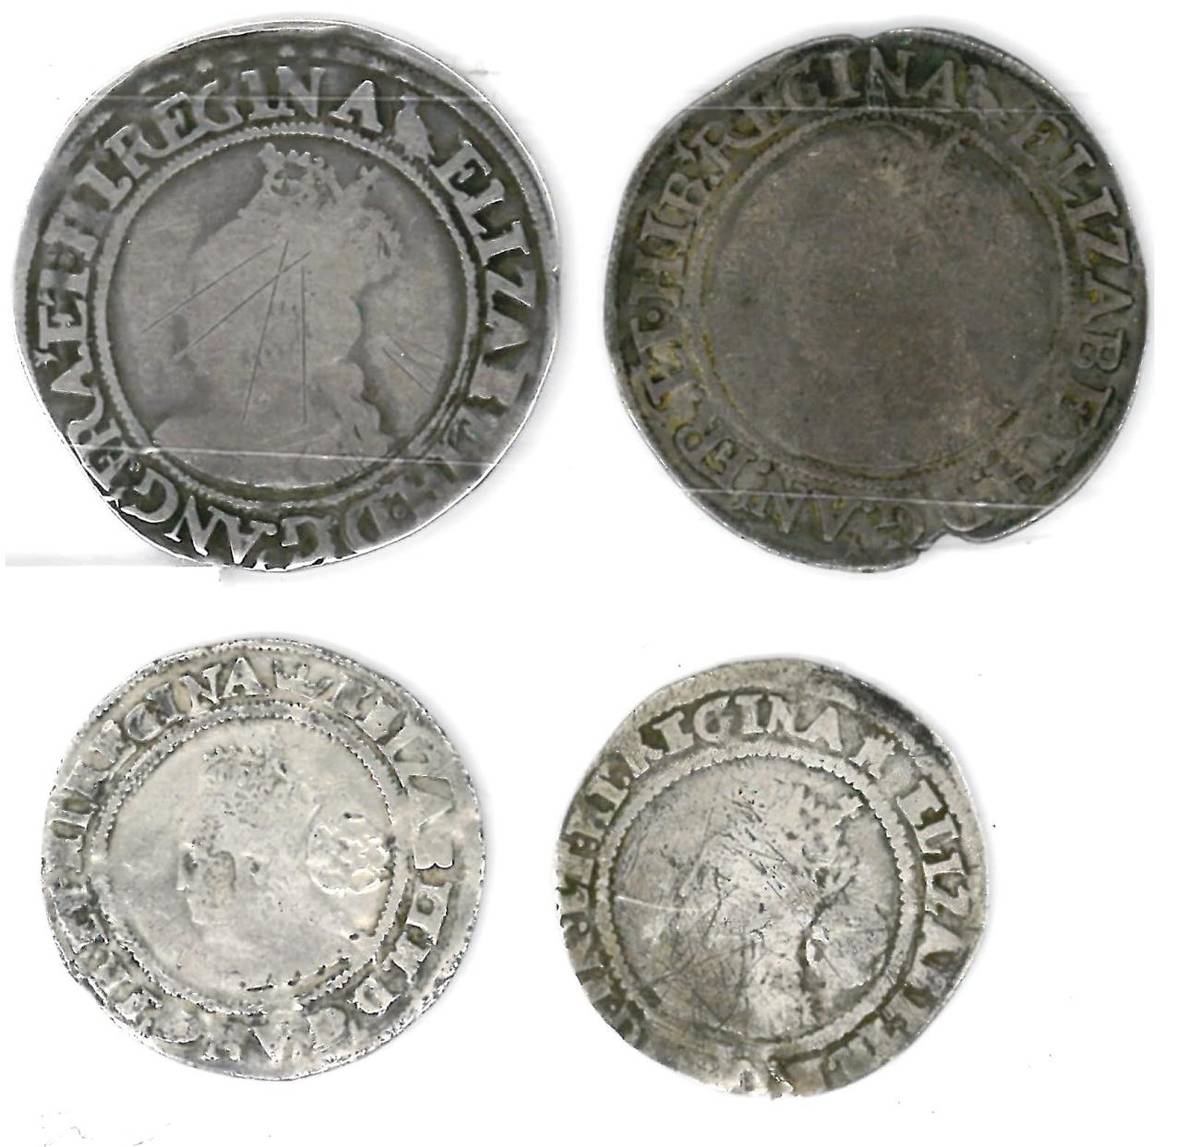 Lot 2 - Elizabeth I, 2 x Shillings: (1)  2nd issue MM martlet, scratches on bust, bust worn Poor apart from